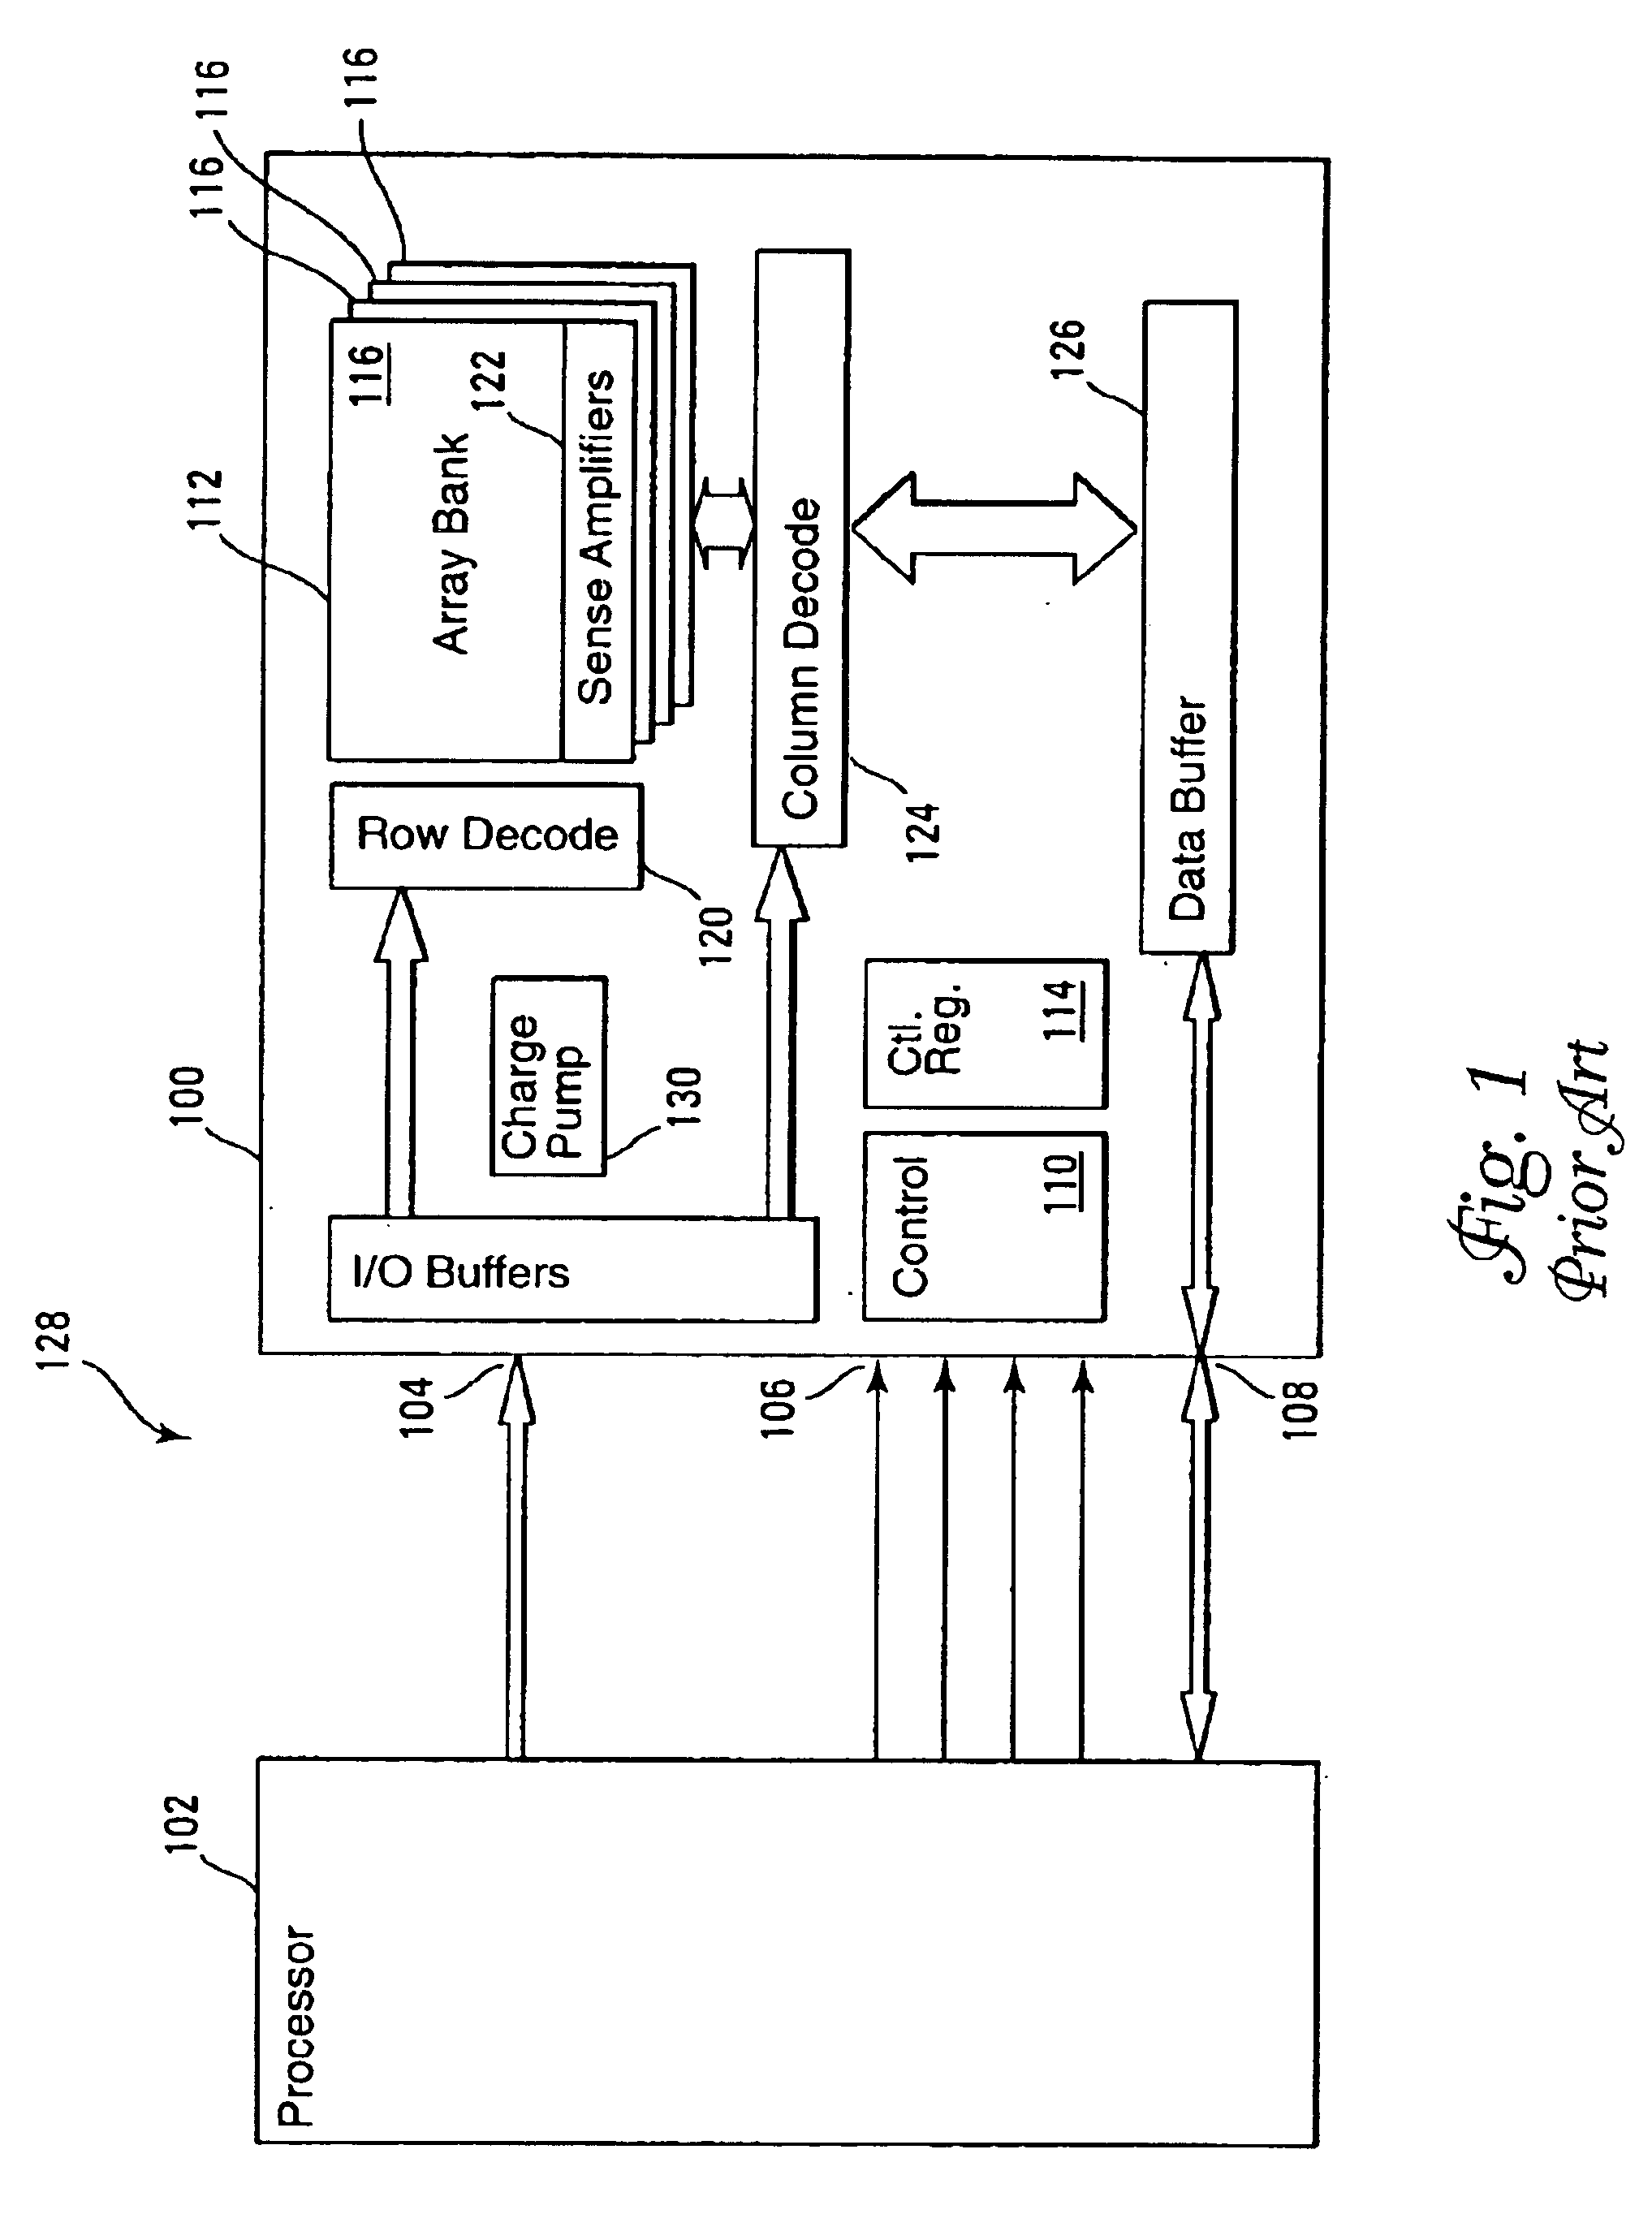 High voltage regulator for low voltage integrated circuit processes